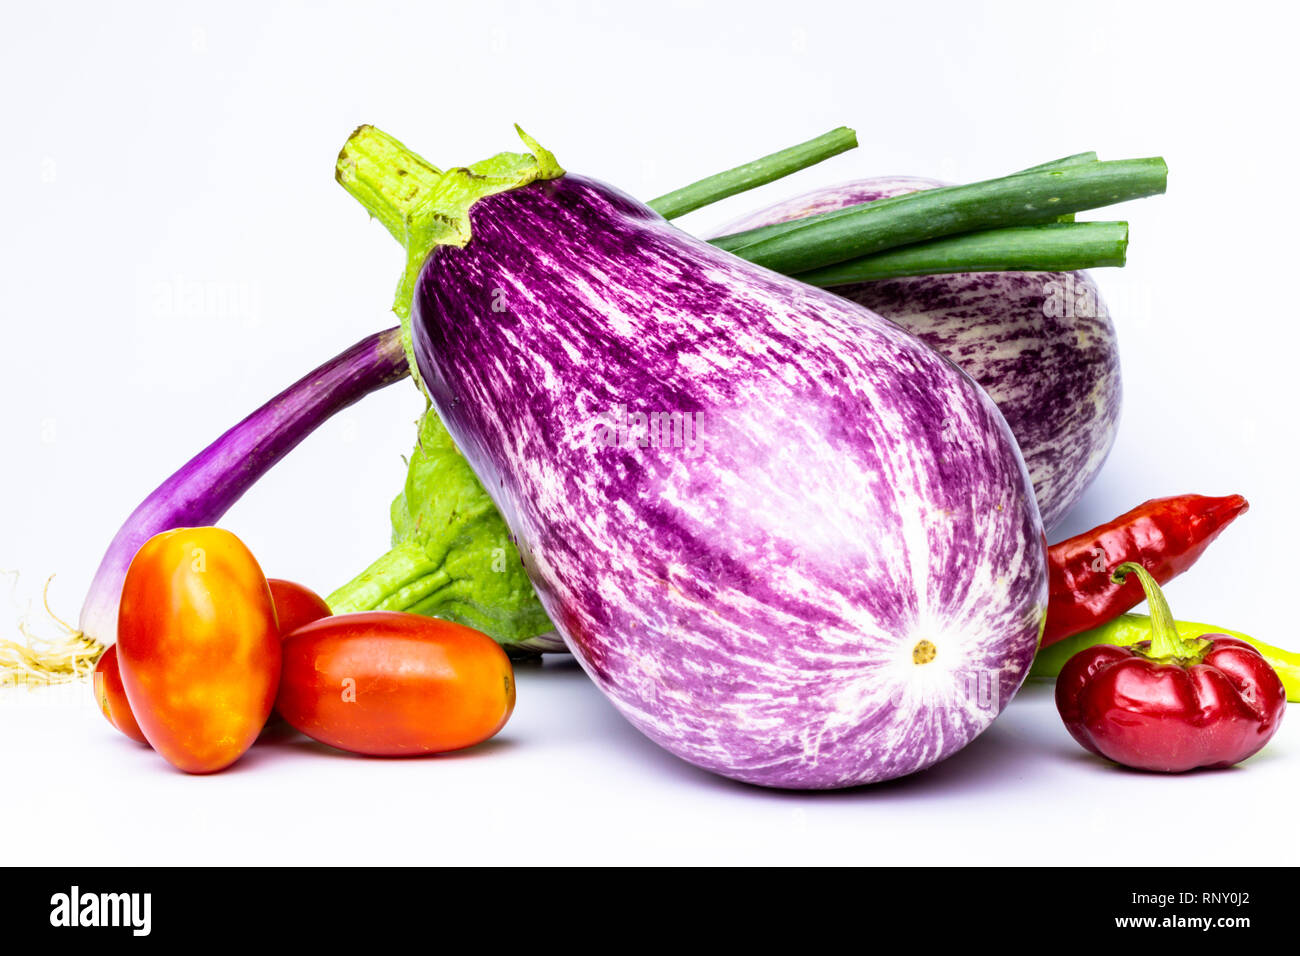 Various vegetables on white background. Horizontal view Vegetables colored several colors on neutral background. Organic vegan or vegetarian food. Stock Photo